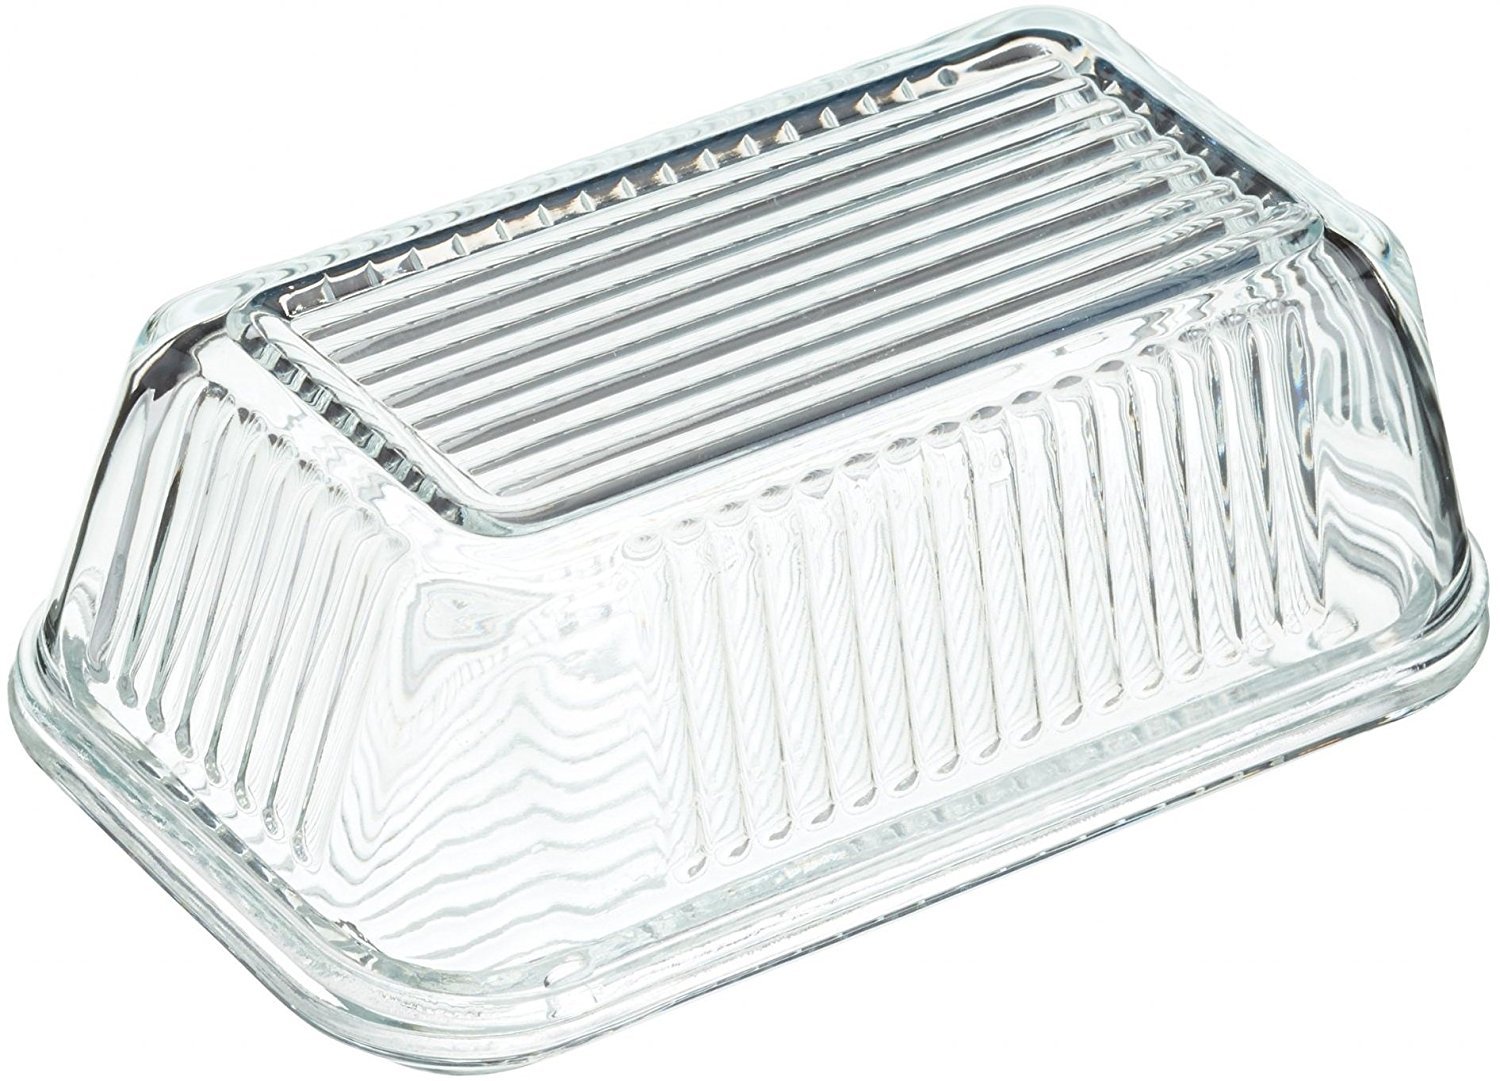 Circleware Farm Glass Butter Dish with Glass Lid, Multi-Purpose Preserving Serving Dessert Dish Tray, 6.75